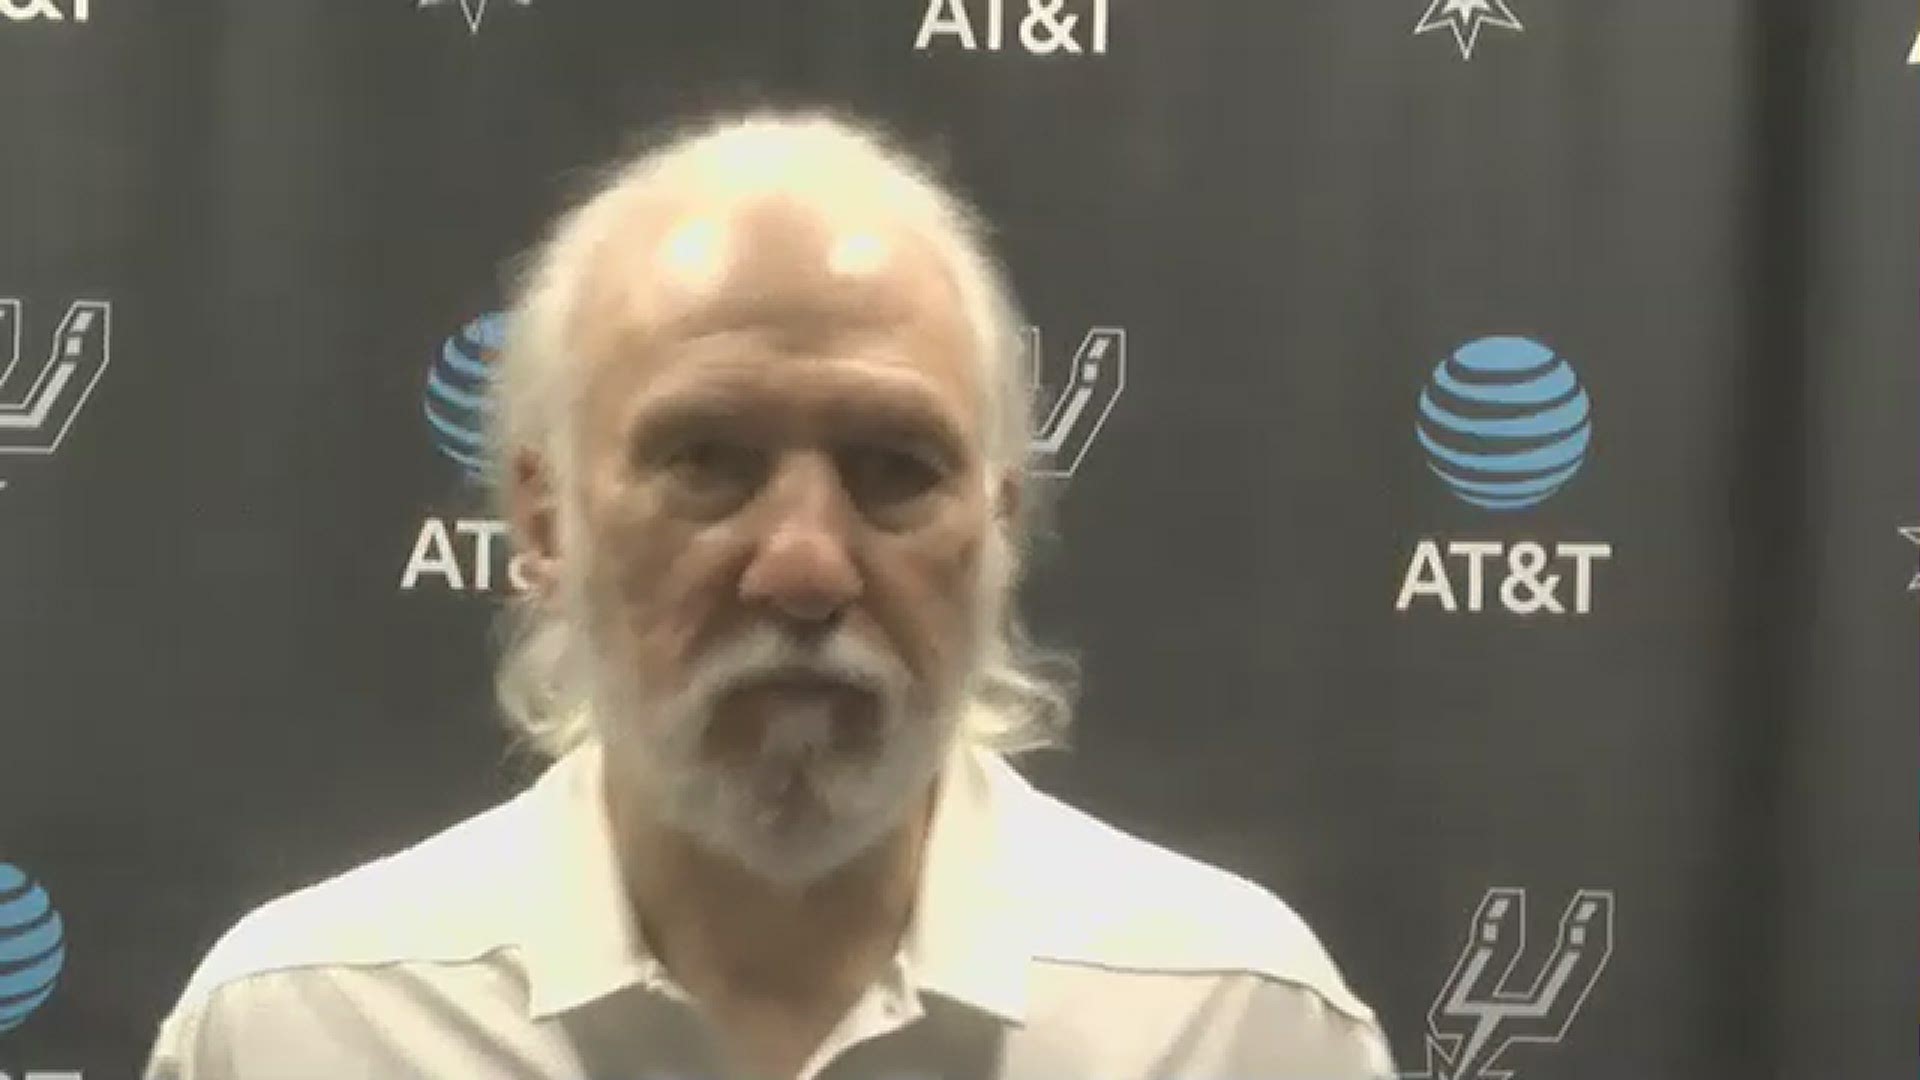 Popovich said some might return before the All Star break, but they wouldn't have a full squad by then.